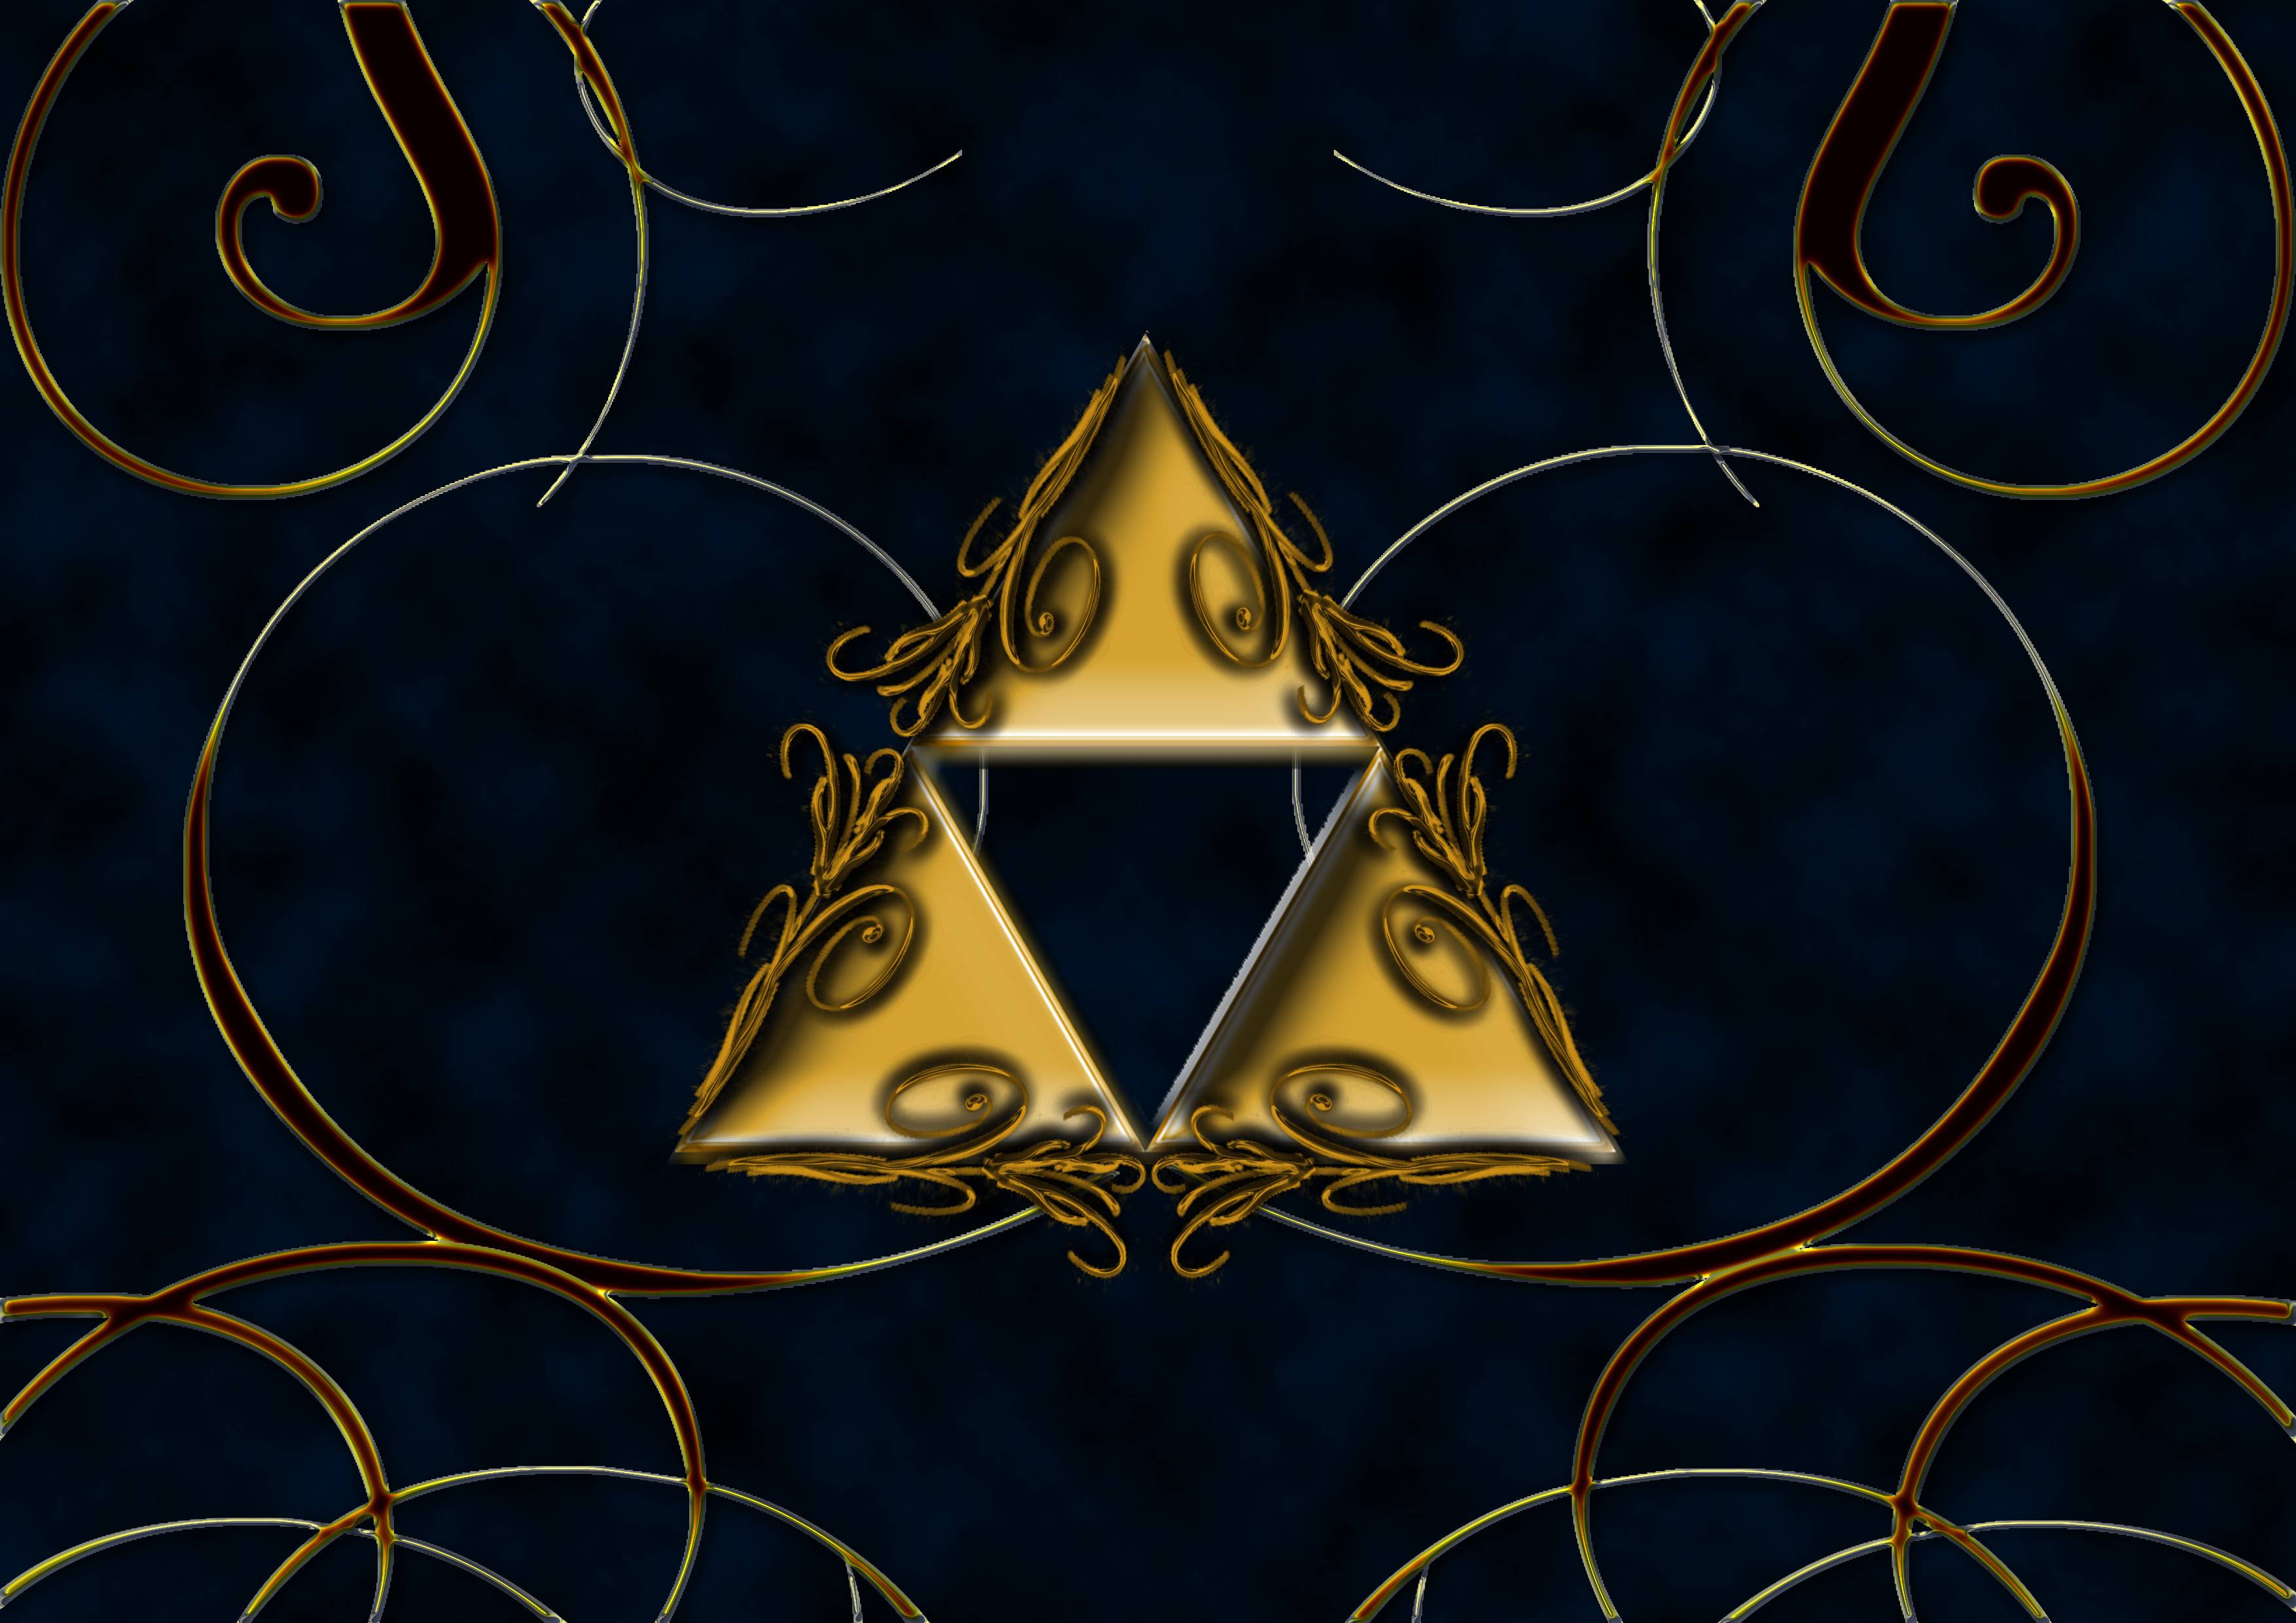 Triforce wallpaper - (#22014) - High Quality and Resolution ...